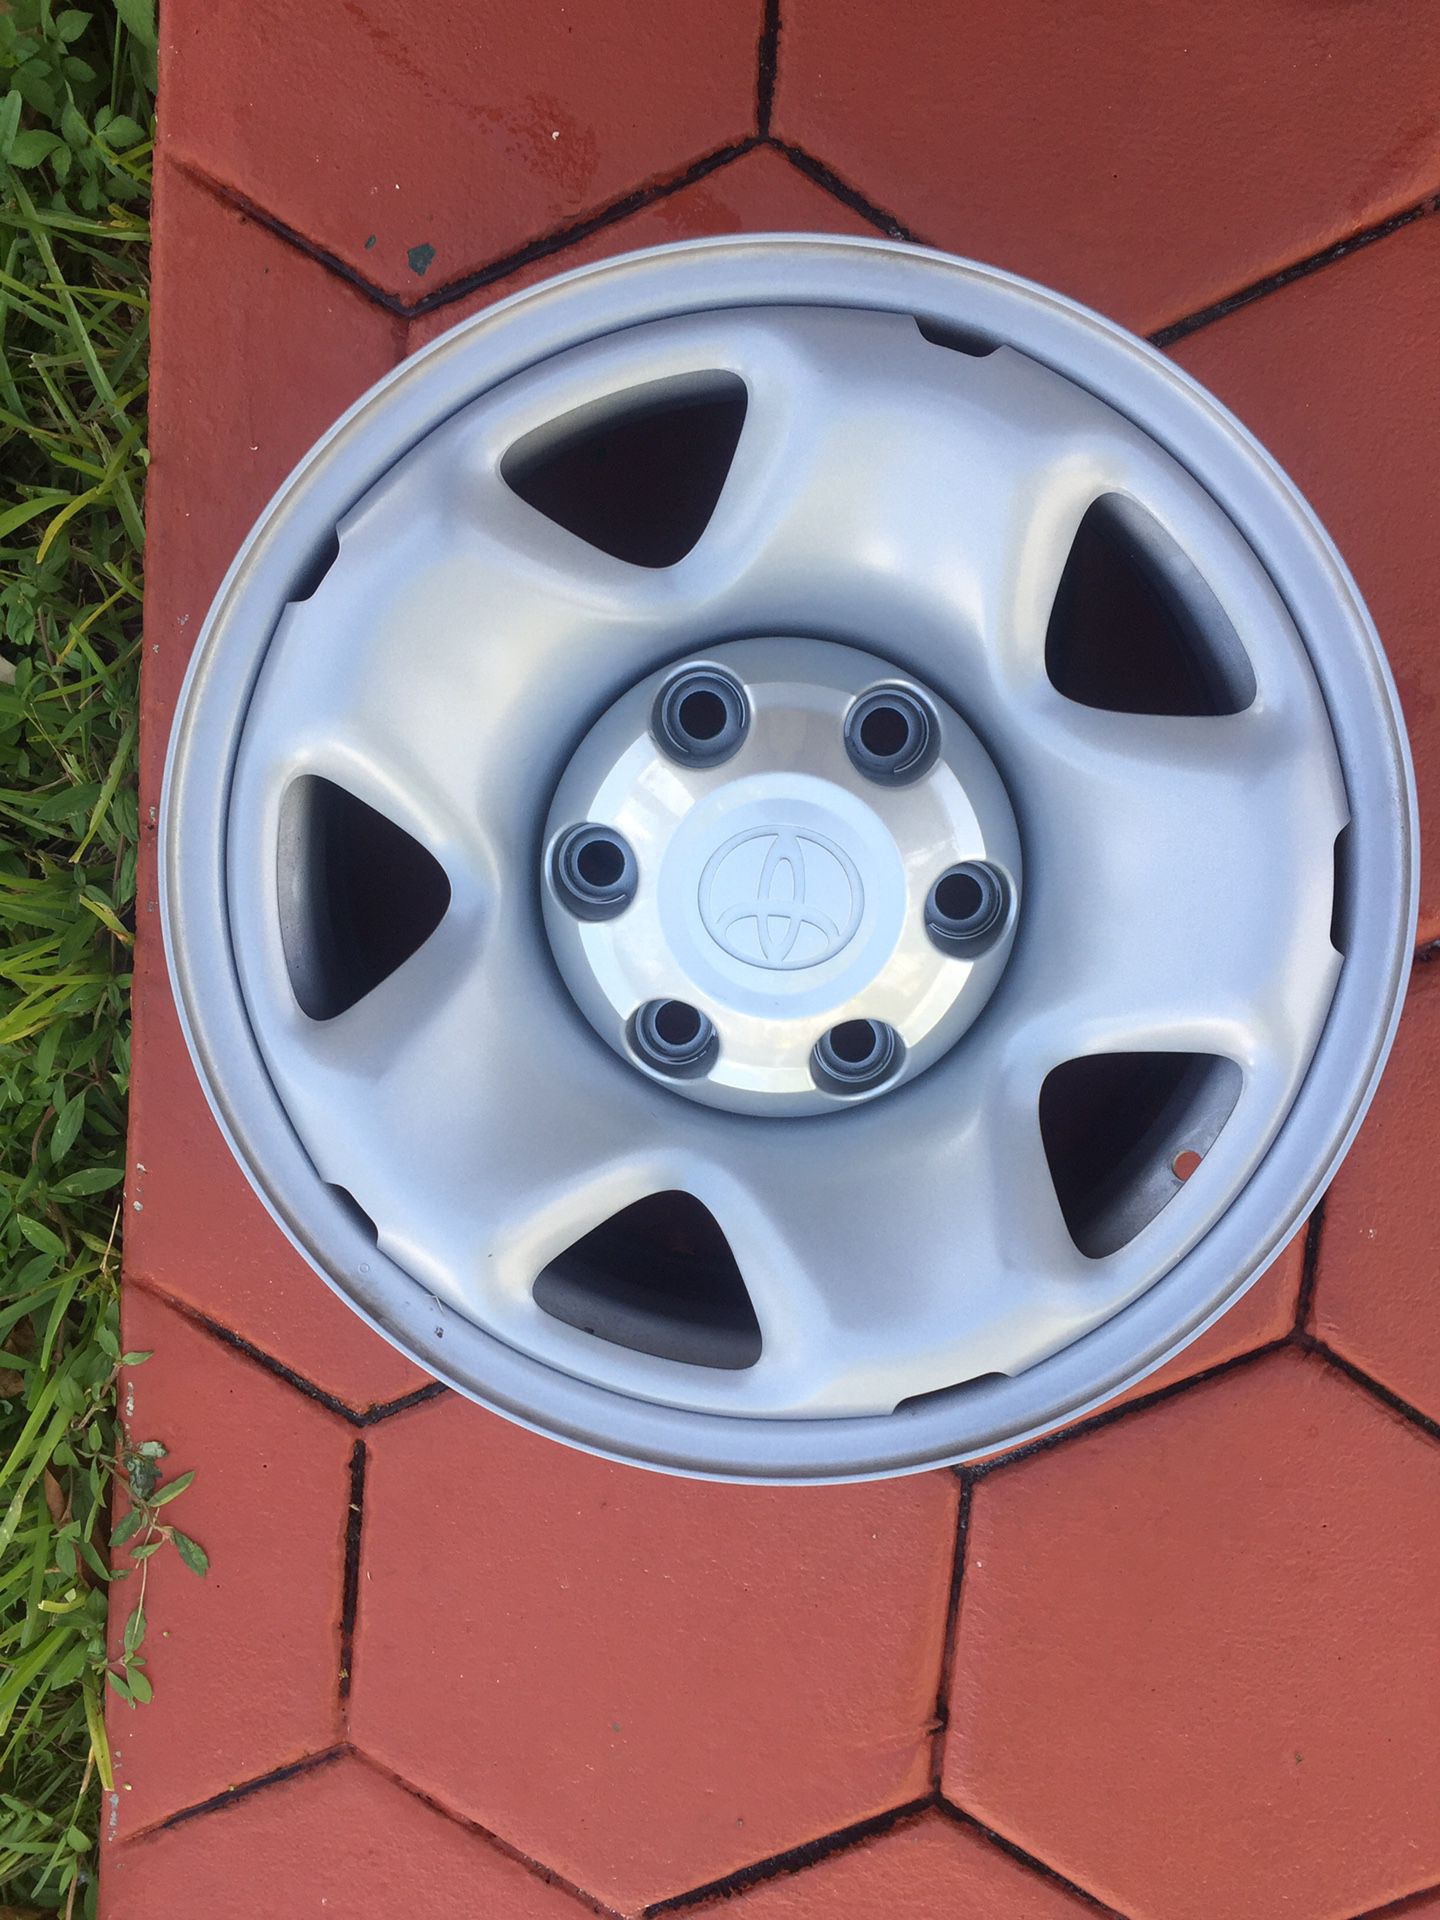 16" inch, 2019 Toyota Tacoma stock alloy wheels, rim in new condition. No tires. Fits 1999-2019